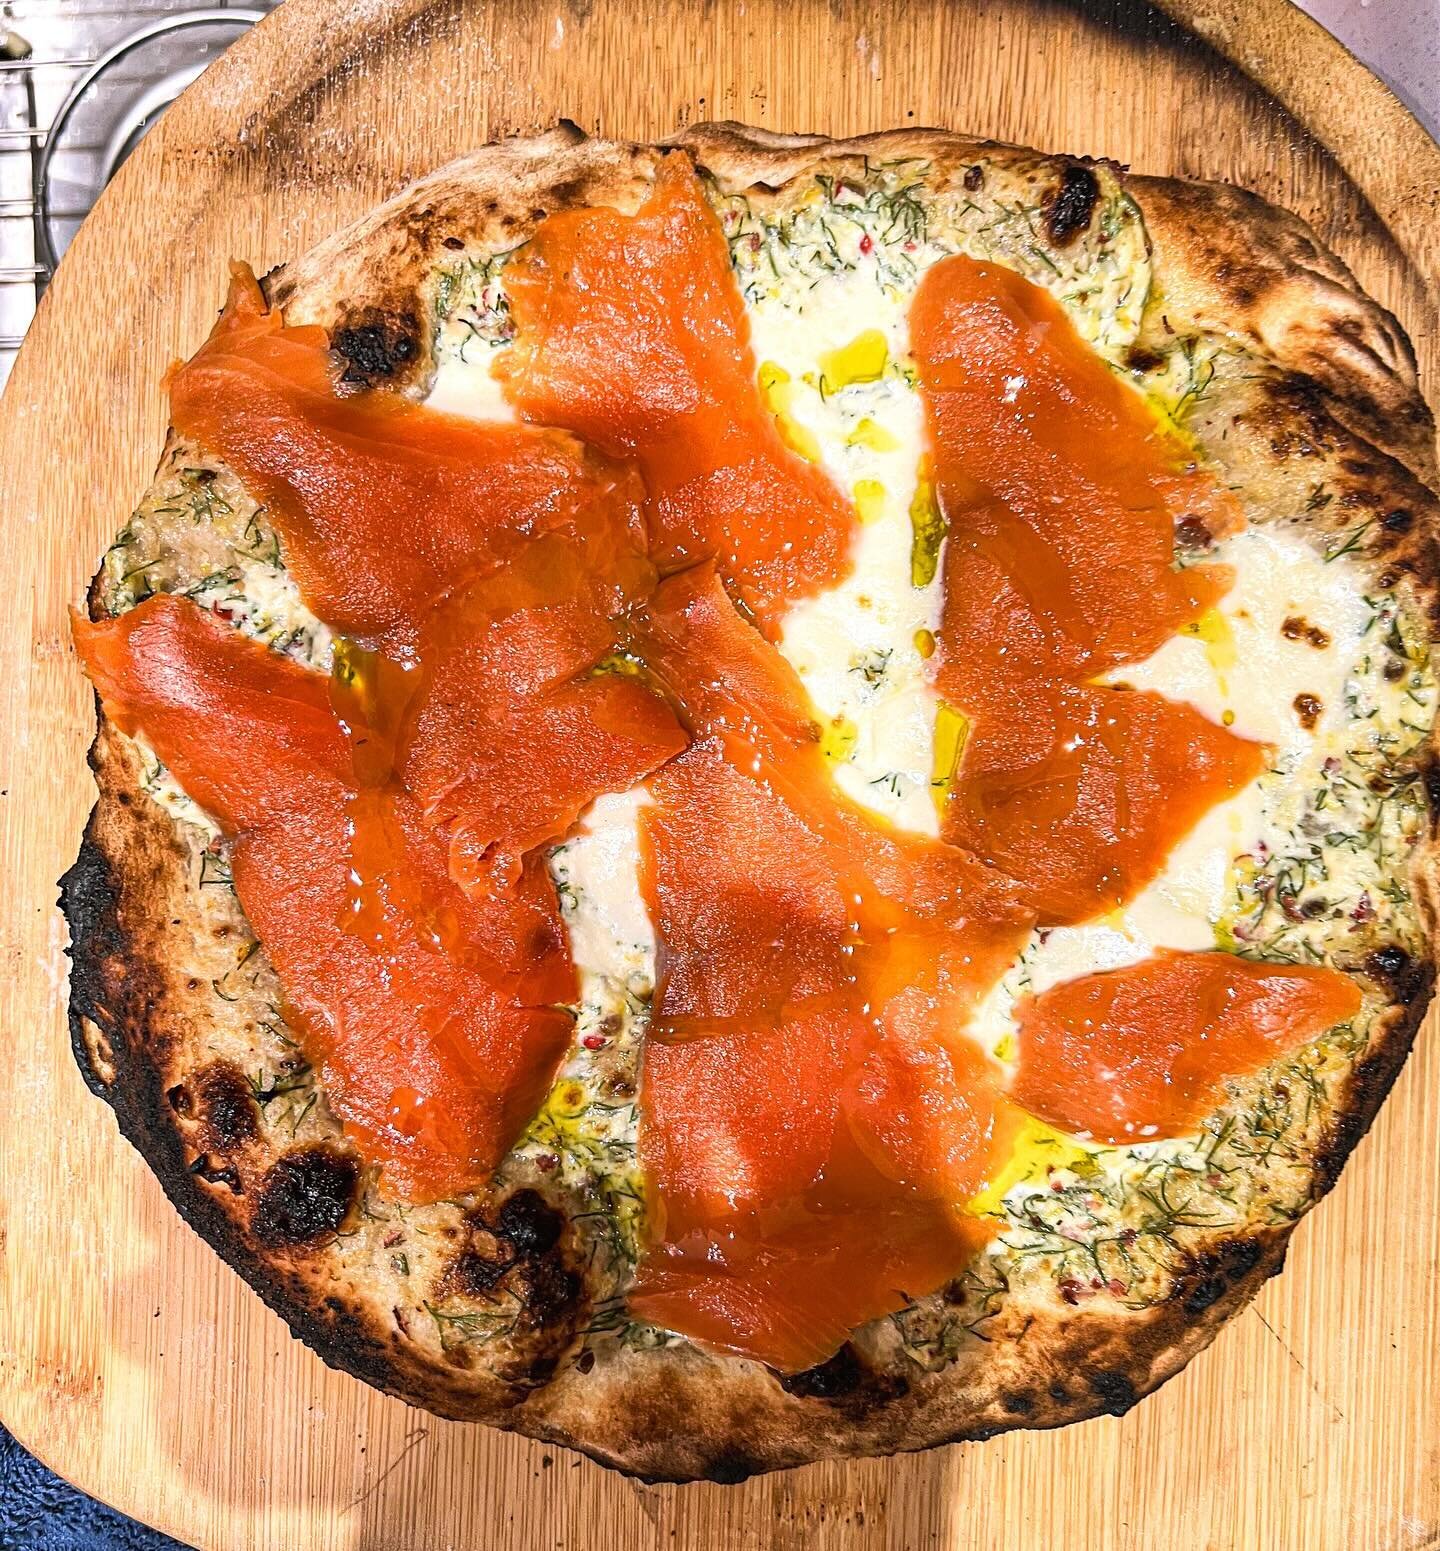 Starting another night with pizza - Nordic style with smoked salmon added after cooking the crust with cr&egrave;me fra&icirc;che, dill, lemon and cracked pink peppercorns (terrific with @champagnephilippegonet exceptional ros&eacute; Champagne) and 